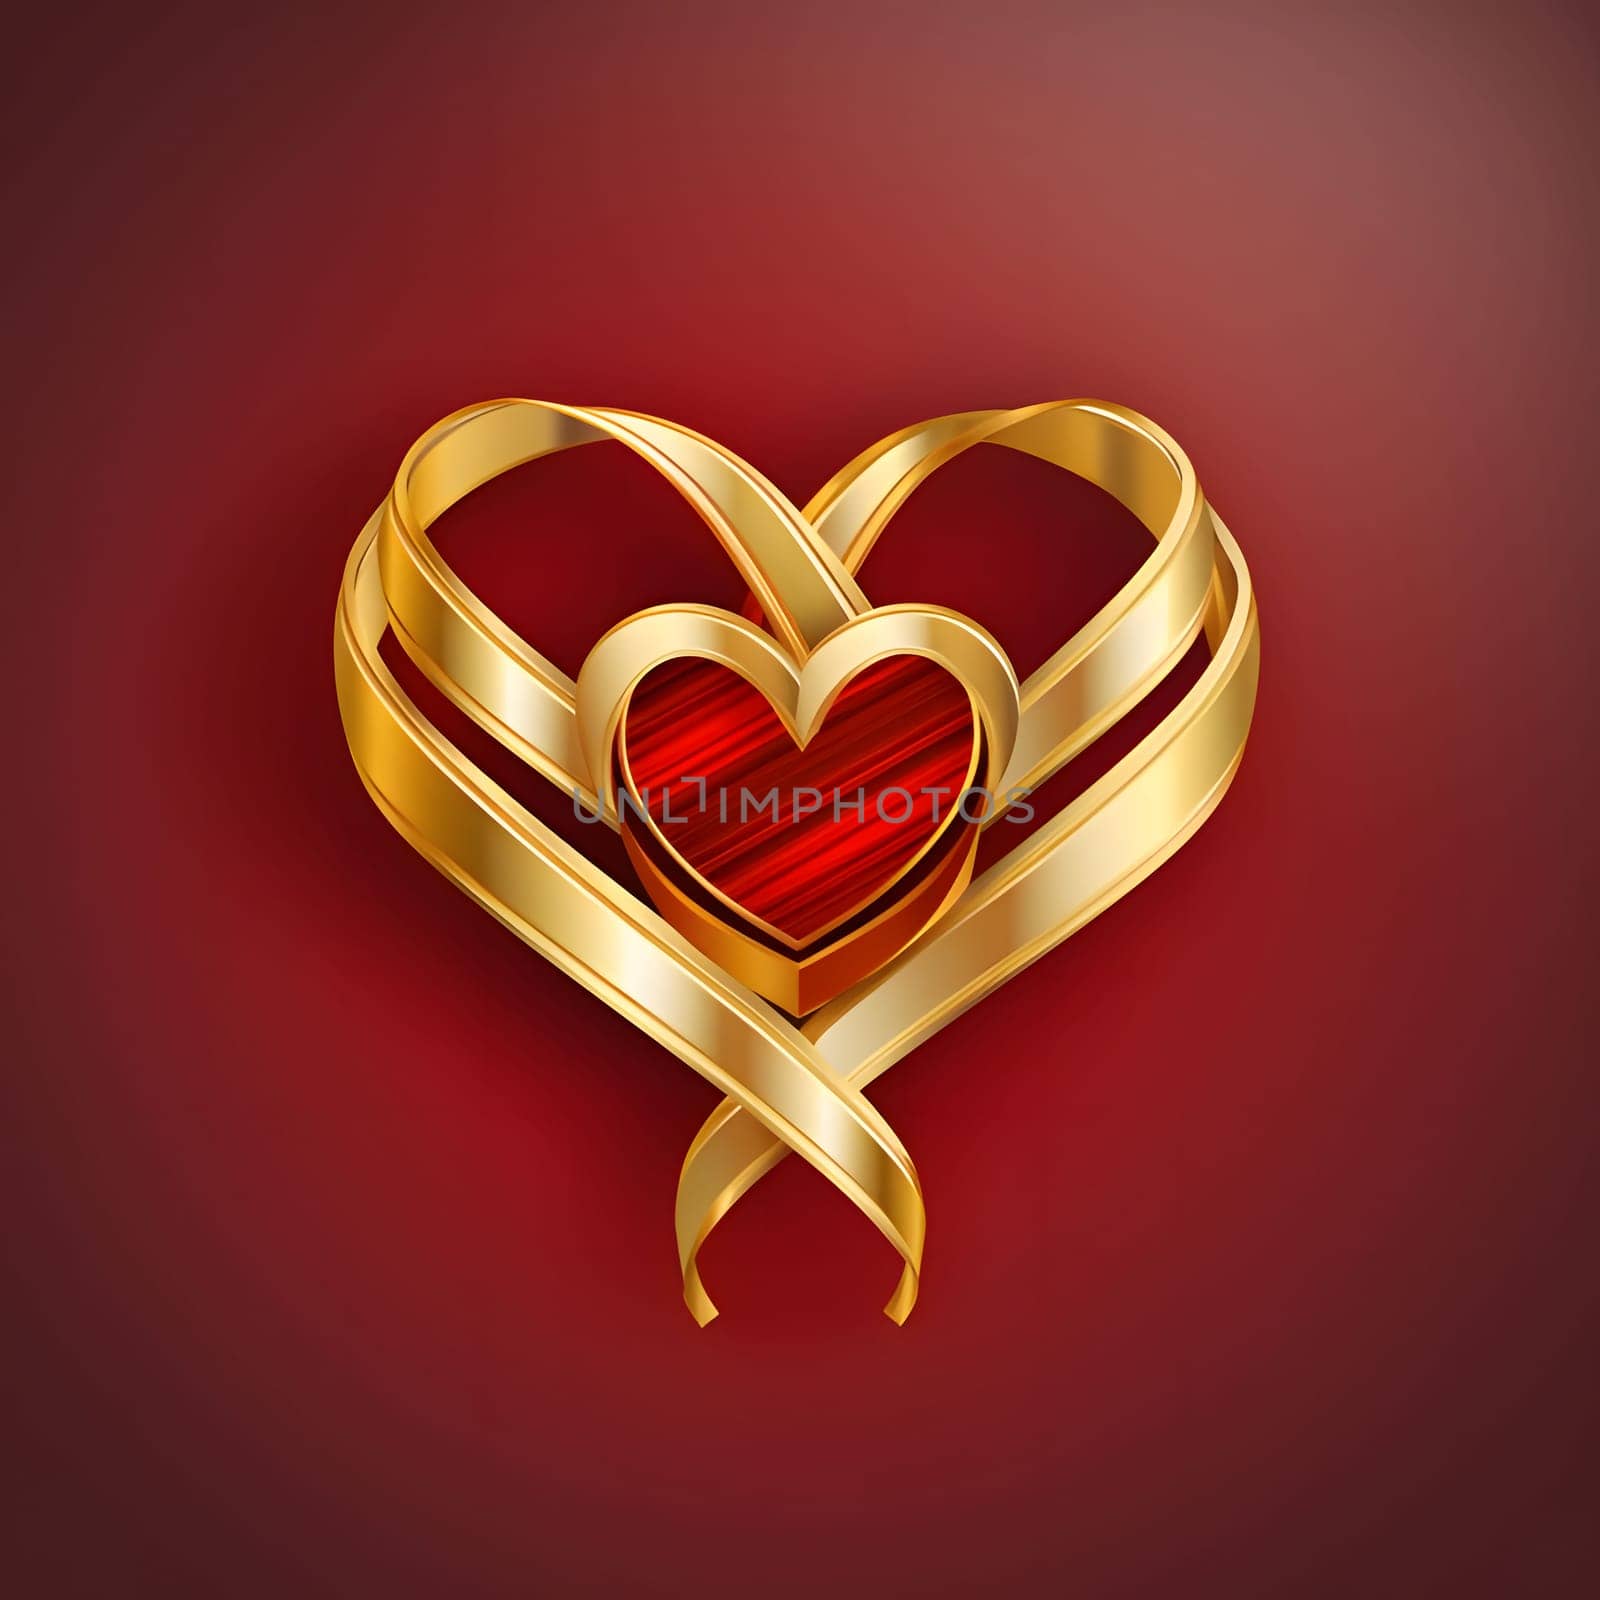 Gold bow in the middle, red heart, red background. Heart as a symbol of affection and love. The time of falling in love and love.